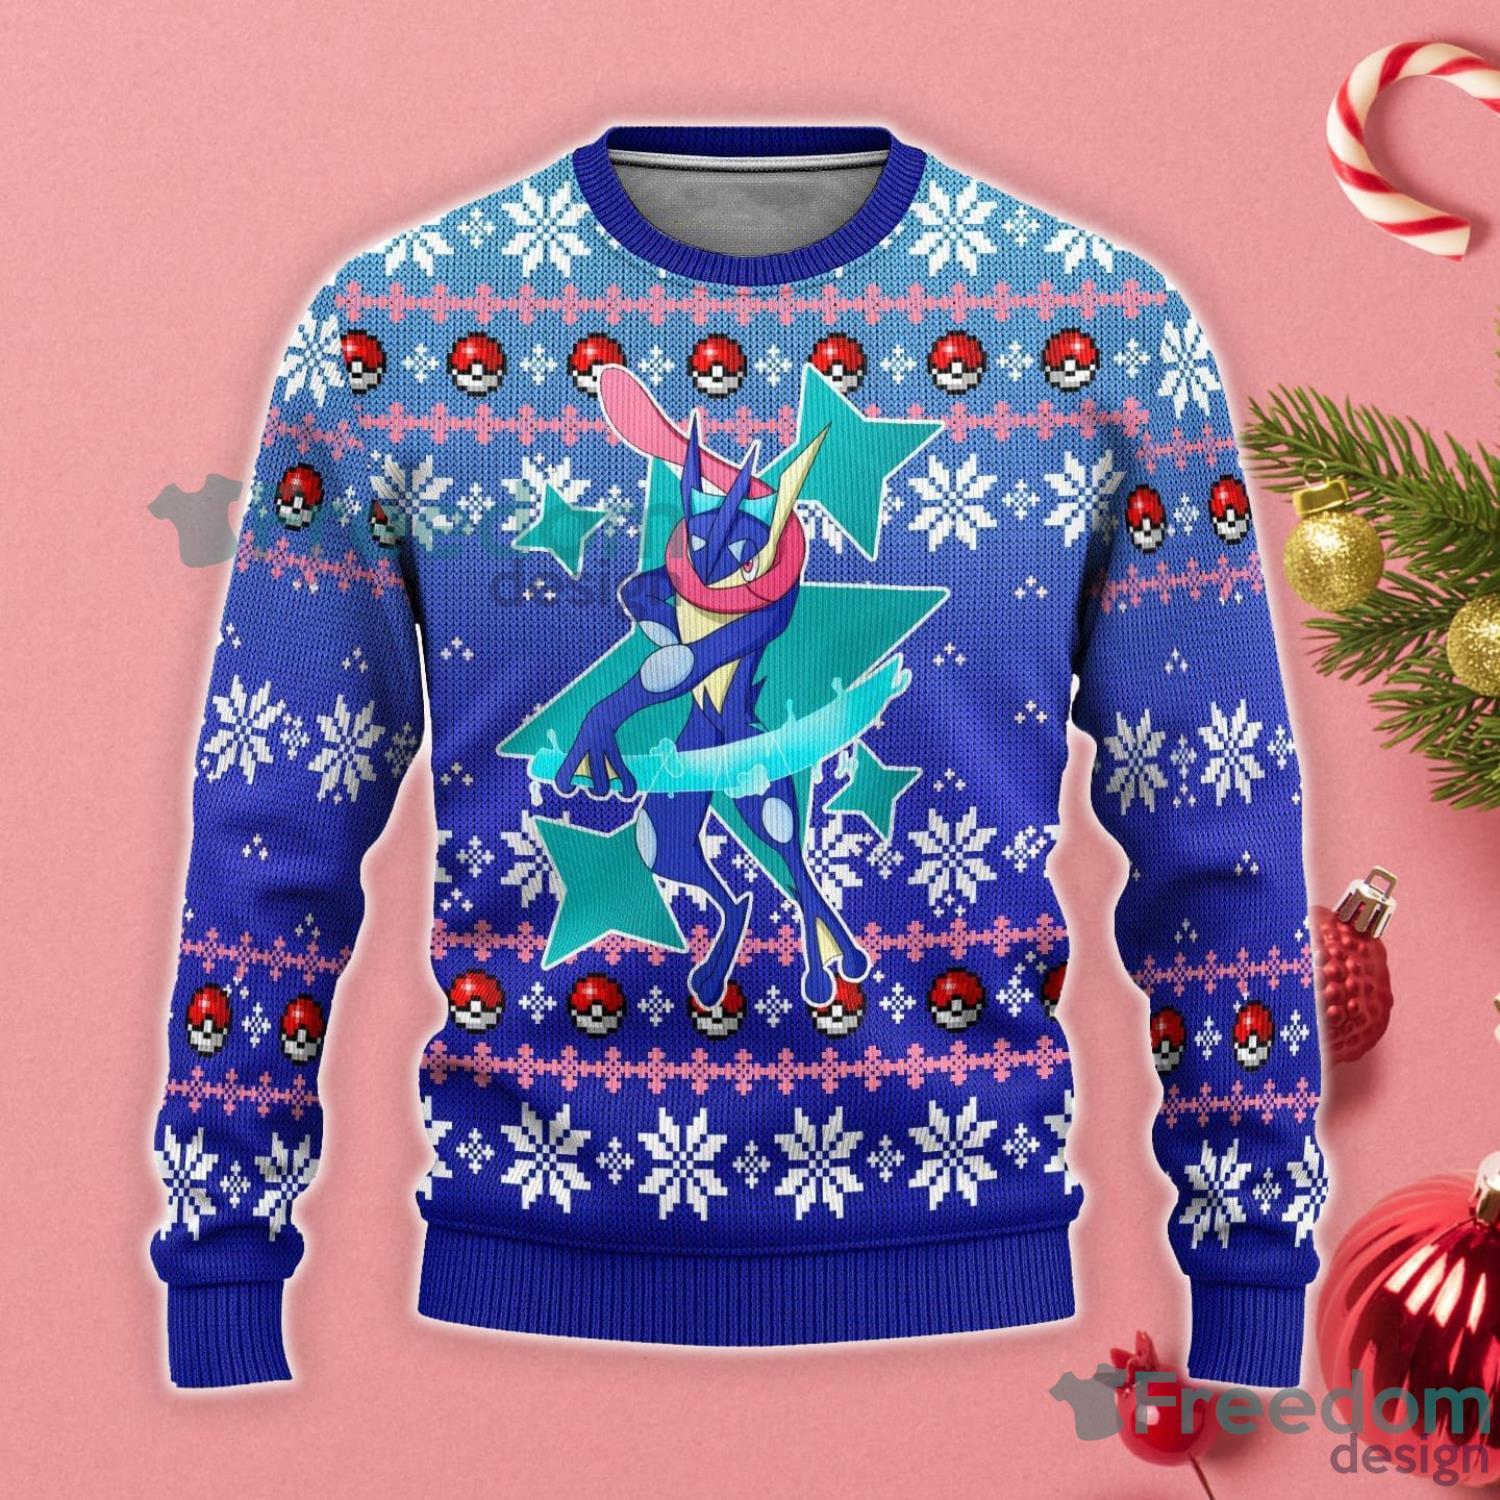 NARUTO SHIPPUDEN UGLY HOLIDAY SWEATERS  The Pop Insider